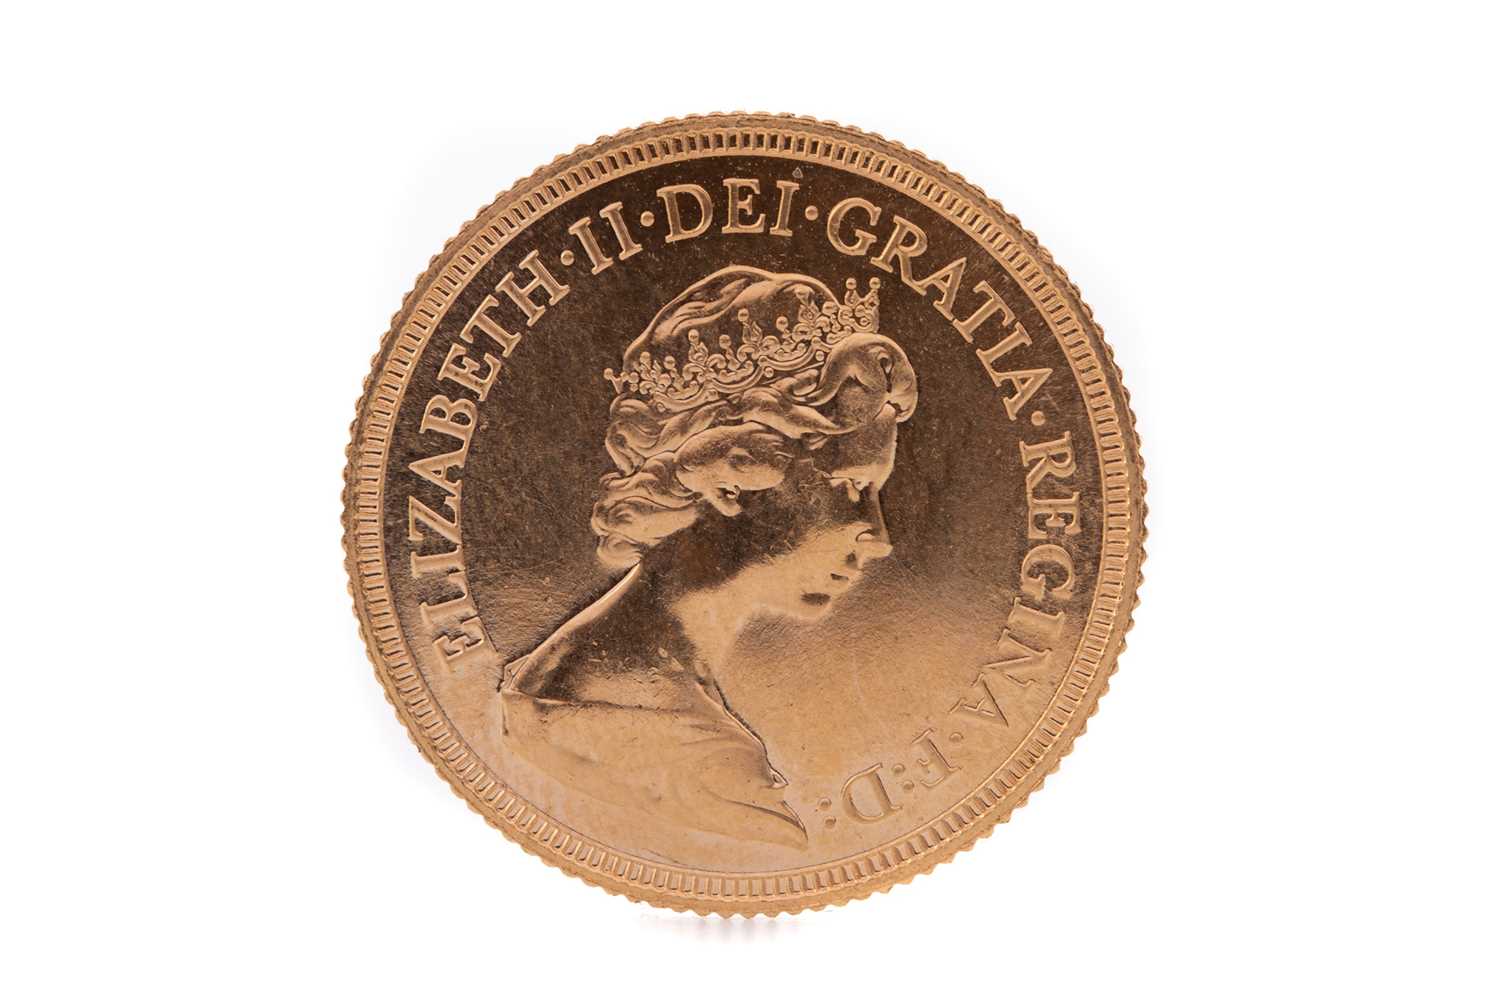 Lot 77 - AN ELIZABETH II GOLD SOVEREIGN DATED 1981